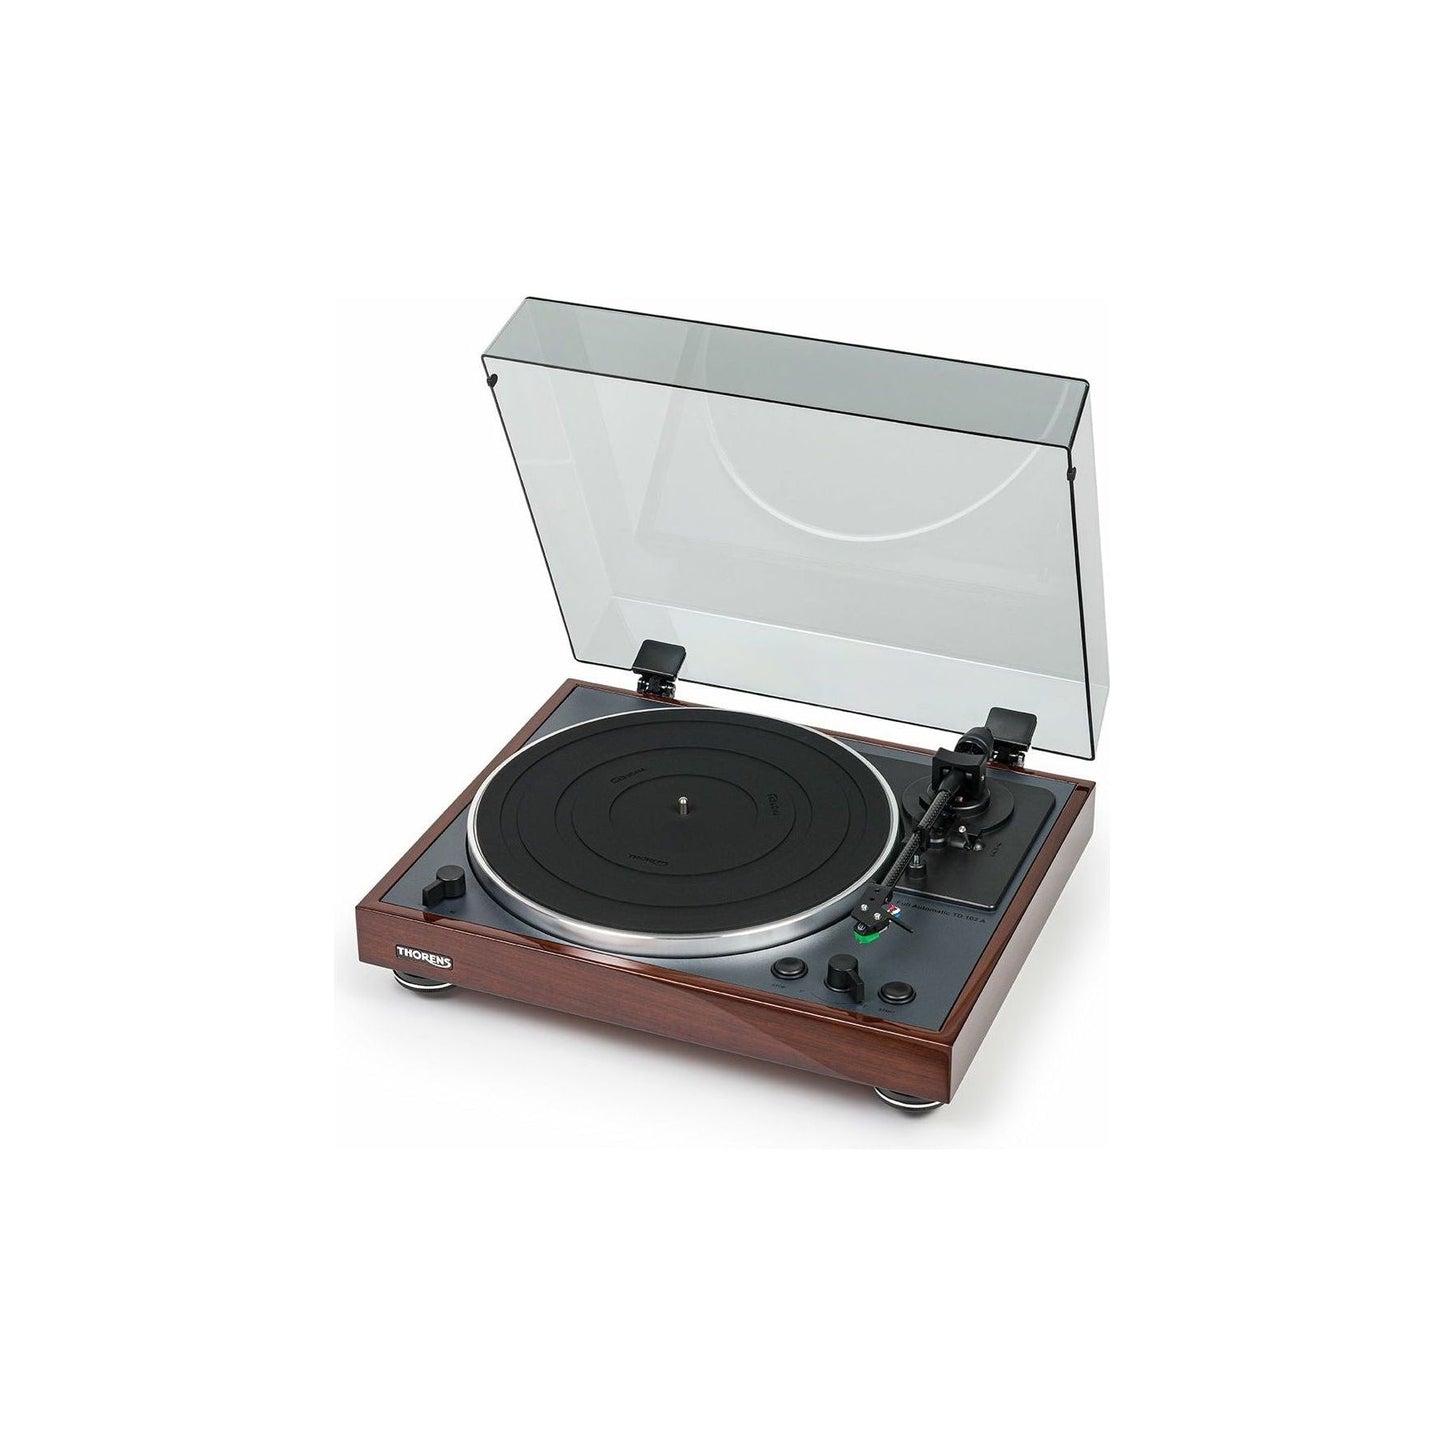 Thorens - TD 102 A - Fully Automatic Turntable